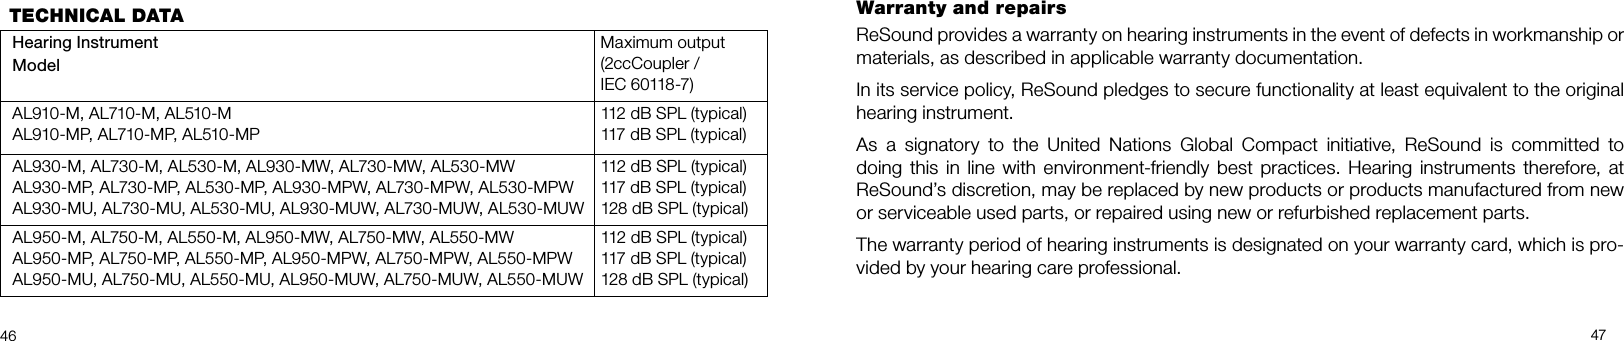 46 47Warranty and repairs ReSound provides a warranty on hearing instruments in the event of defects in workmanship or materials, as described in applicable warranty documentation.In its service policy, ReSound pledges to secure functionality at least equivalent to the original hearing instrument.As  a  signatory  to  the  United  Nations  Global  Compact  initiative,  ReSound  is  committed  to  doing this  in line  with environment-friendly  best practices. Hearing instruments therefore, at ReSound’s discretion, may be replaced by new products or products manufactured from new or serviceable used parts, or repaired using new or refurbished replacement parts.The warranty period of hearing instruments is designated on your warranty card, which is pro-vided by your hearing care professional.TECHNICAL DATAHearing Instrument ModelMaximum output(2ccCoupler / IEC 60118-7)AL910-M, AL710-M, AL510-MAL910-MP, AL710-MP, AL510-MP112 dB SPL (typical)117 dB SPL (typical)AL930-M, AL730-M, AL530-M, AL930-MW, AL730-MW, AL530-MWAL930-MP, AL730-MP, AL530-MP, AL930-MPW, AL730-MPW, AL530-MPWAL930-MU, AL730-MU, AL530-MU, AL930-MUW, AL730-MUW, AL530-MUW112 dB SPL (typical)117 dB SPL (typical)128 dB SPL (typical)AL950-M, AL750-M, AL550-M, AL950-MW, AL750-MW, AL550-MWAL950-MP, AL750-MP, AL550-MP, AL950-MPW, AL750-MPW, AL550-MPWAL950-MU, AL750-MU, AL550-MU, AL950-MUW, AL750-MUW, AL550-MUW112 dB SPL (typical)117 dB SPL (typical)128 dB SPL (typical)